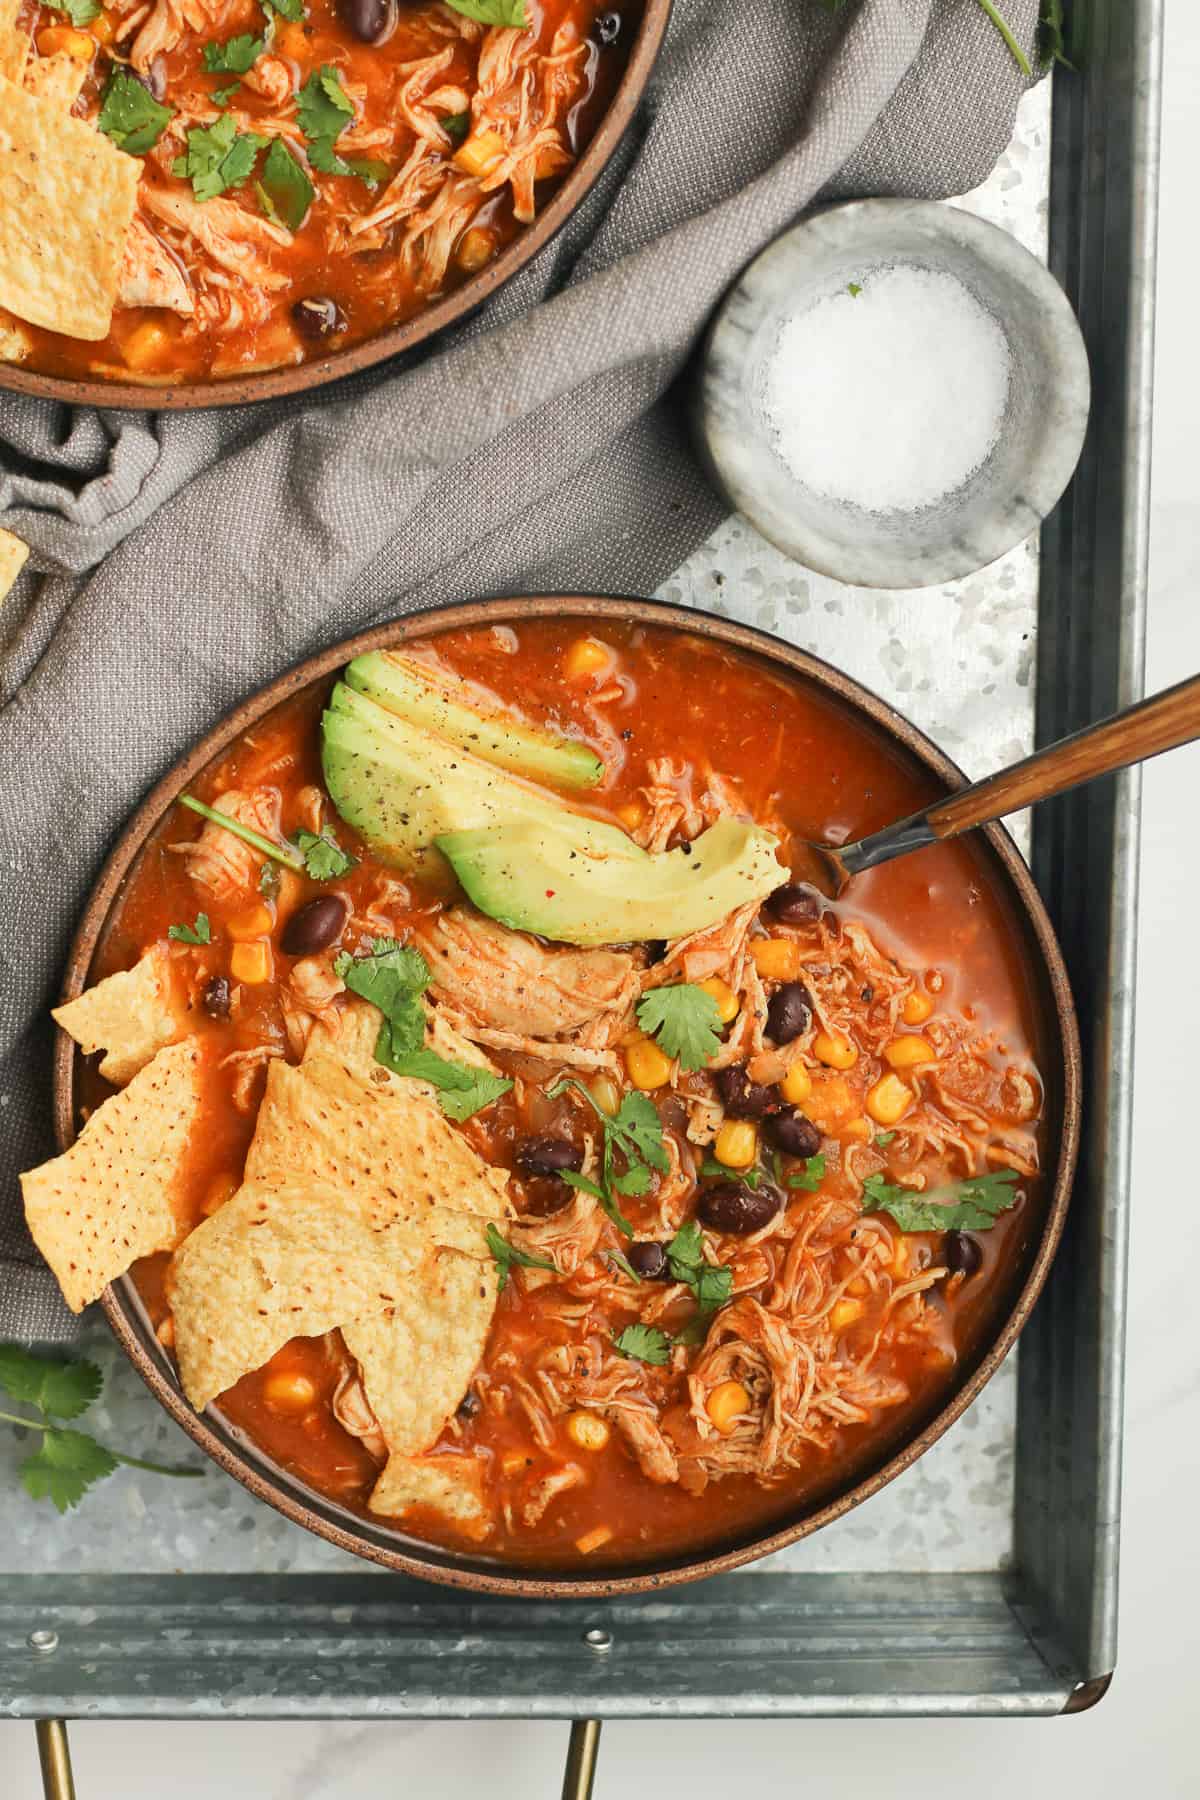 Two bowls of chicken tortilla soup on a gray tray.